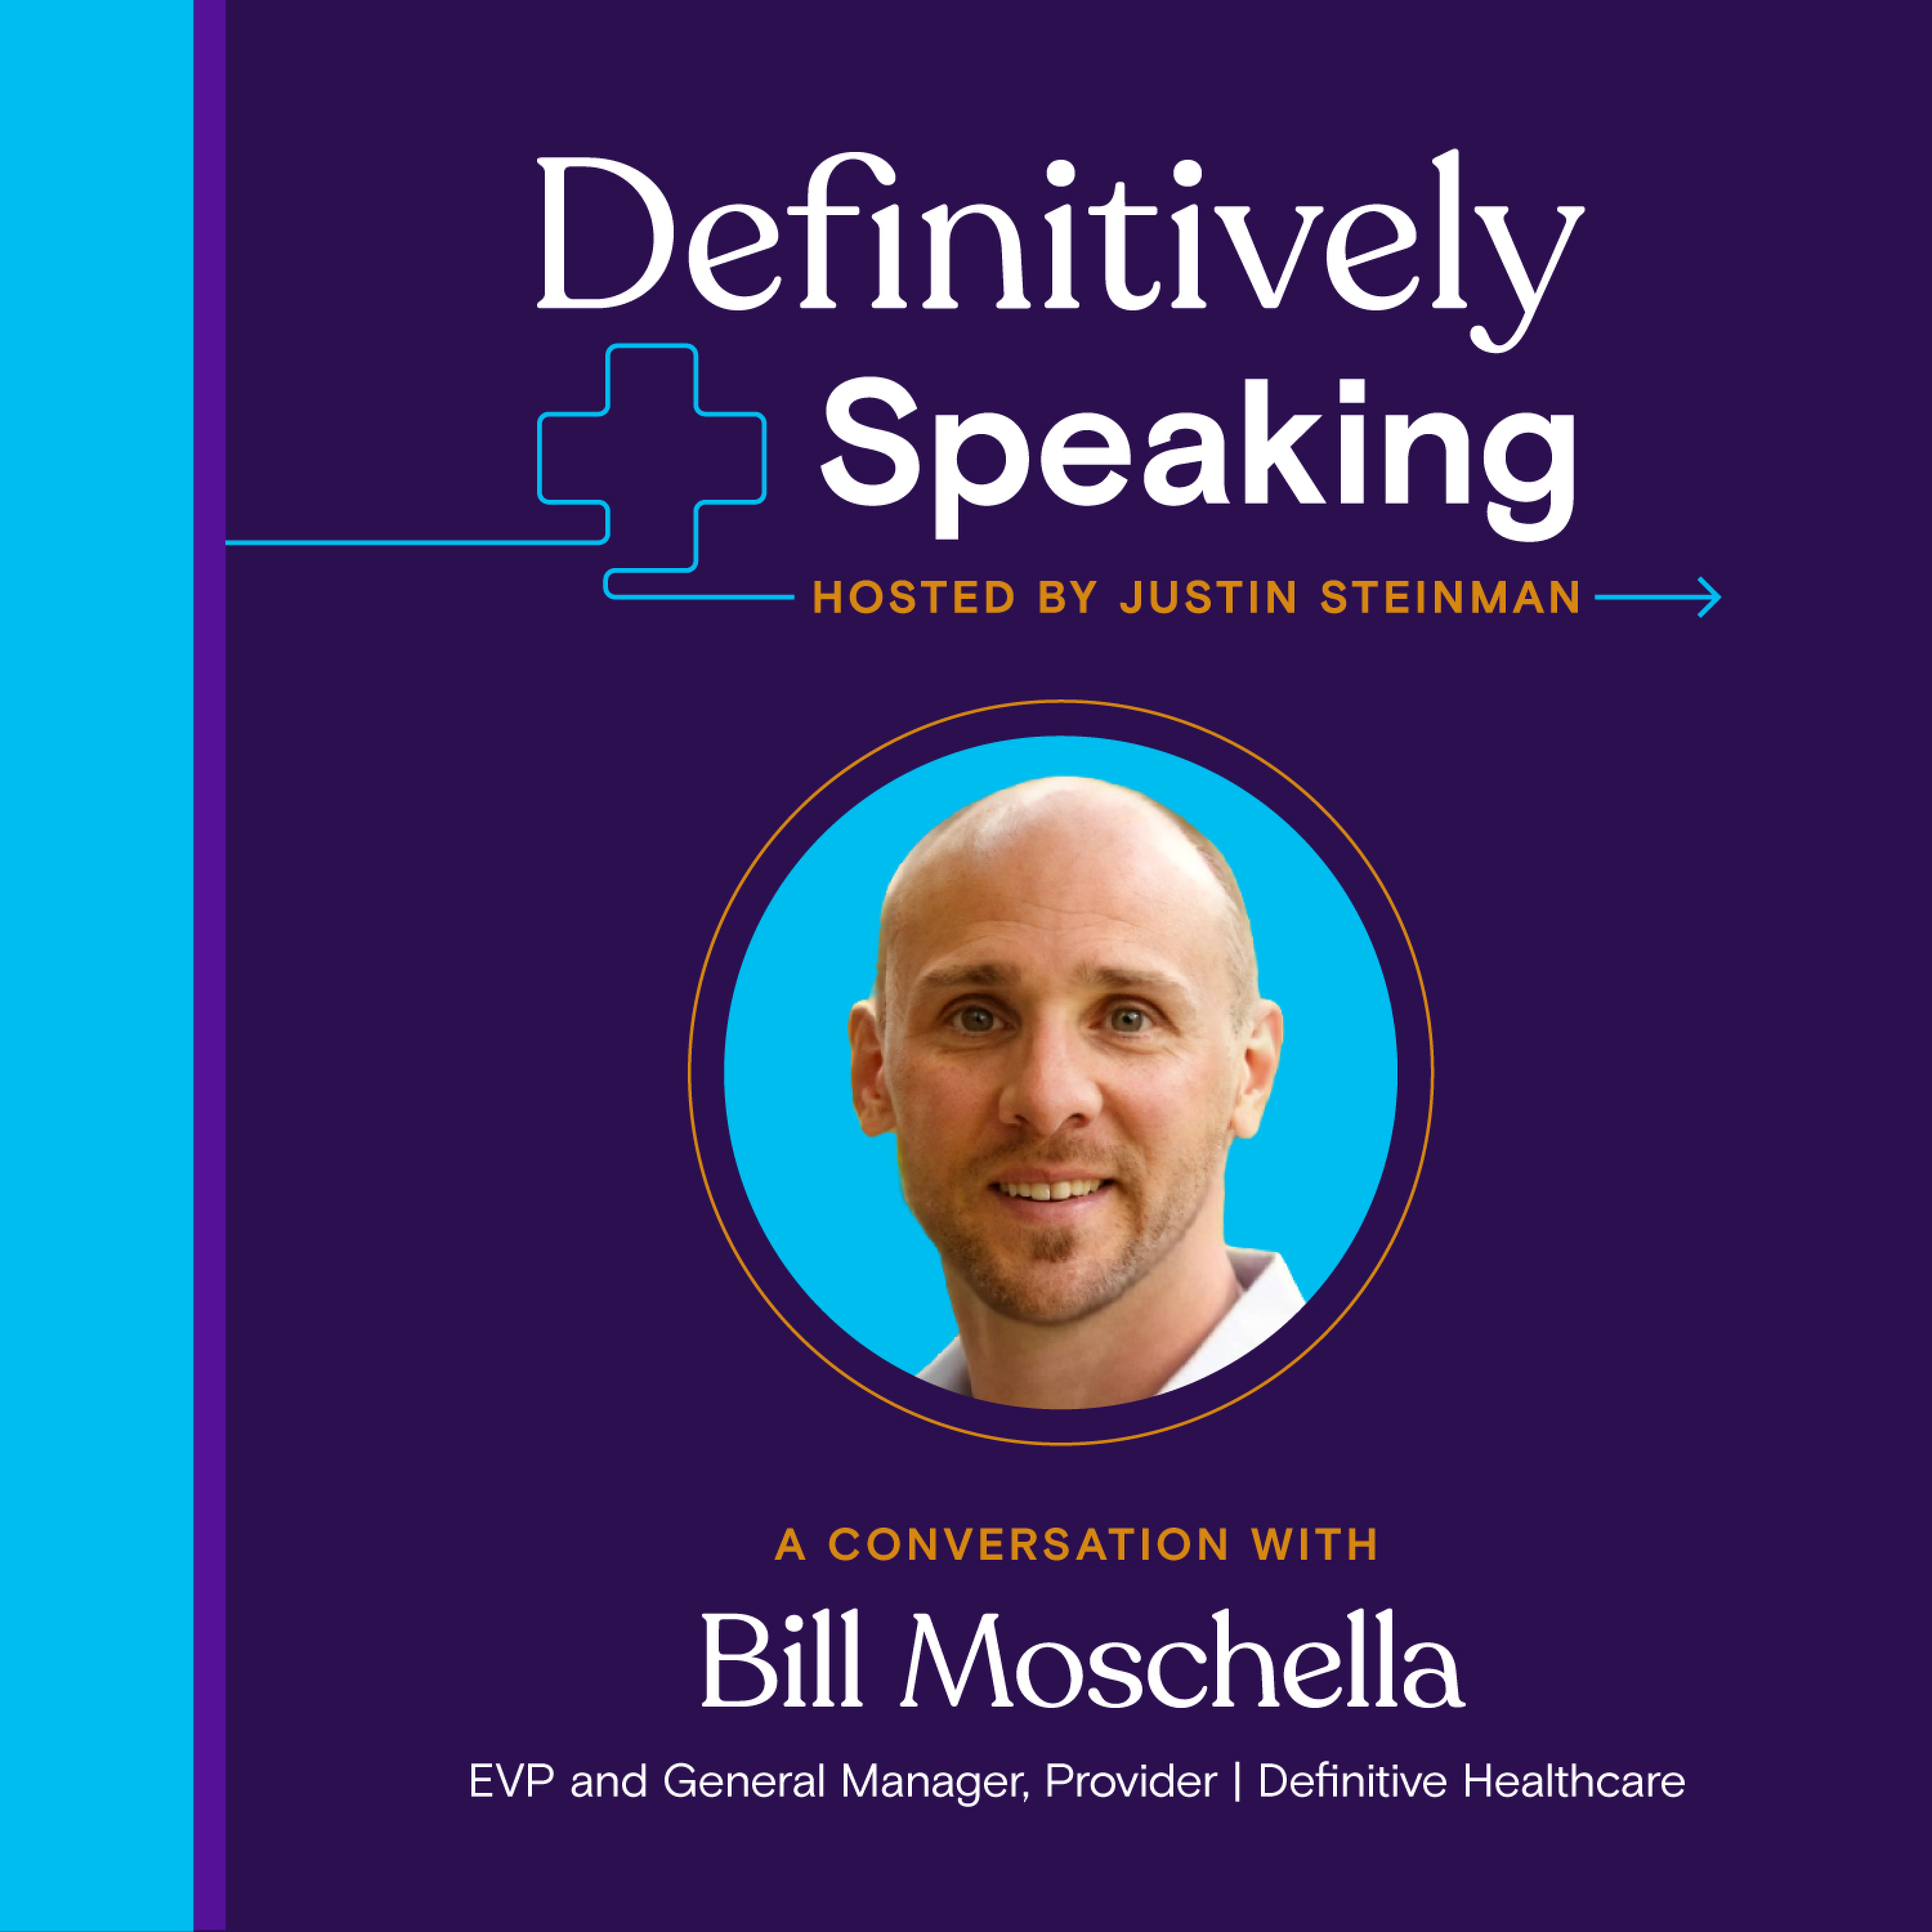 Episode 39: It’s tough out there! How healthcare providers can grow (even in a challenging economy) with Bill Moschella of Definitive Healthcare